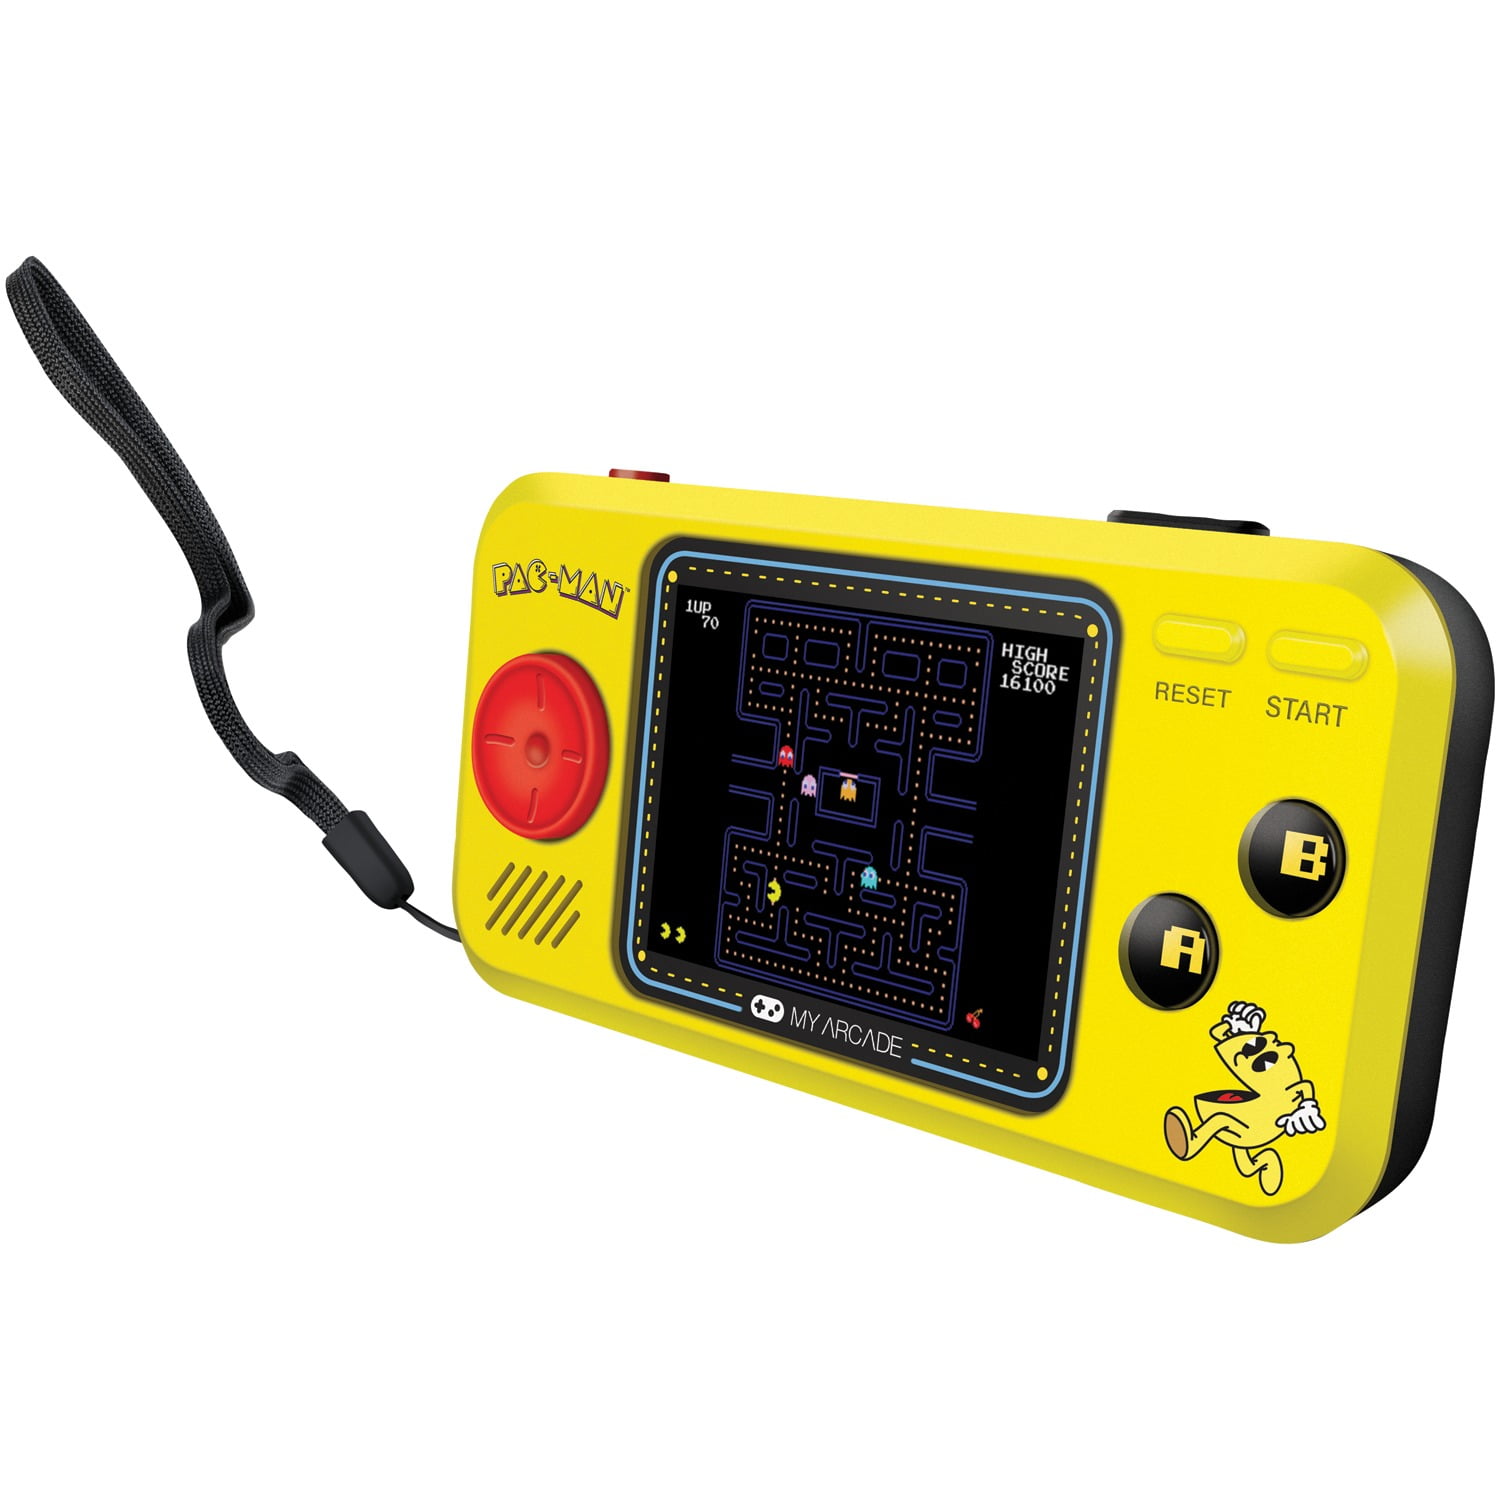 Pac-Man, Pac-Panic, Pac-Mania 0845620032273 MyArcade - DRMDGUNL3227 Pac-Man Pocket Player Handheld Game Console 3 Built-In Games for sale online 